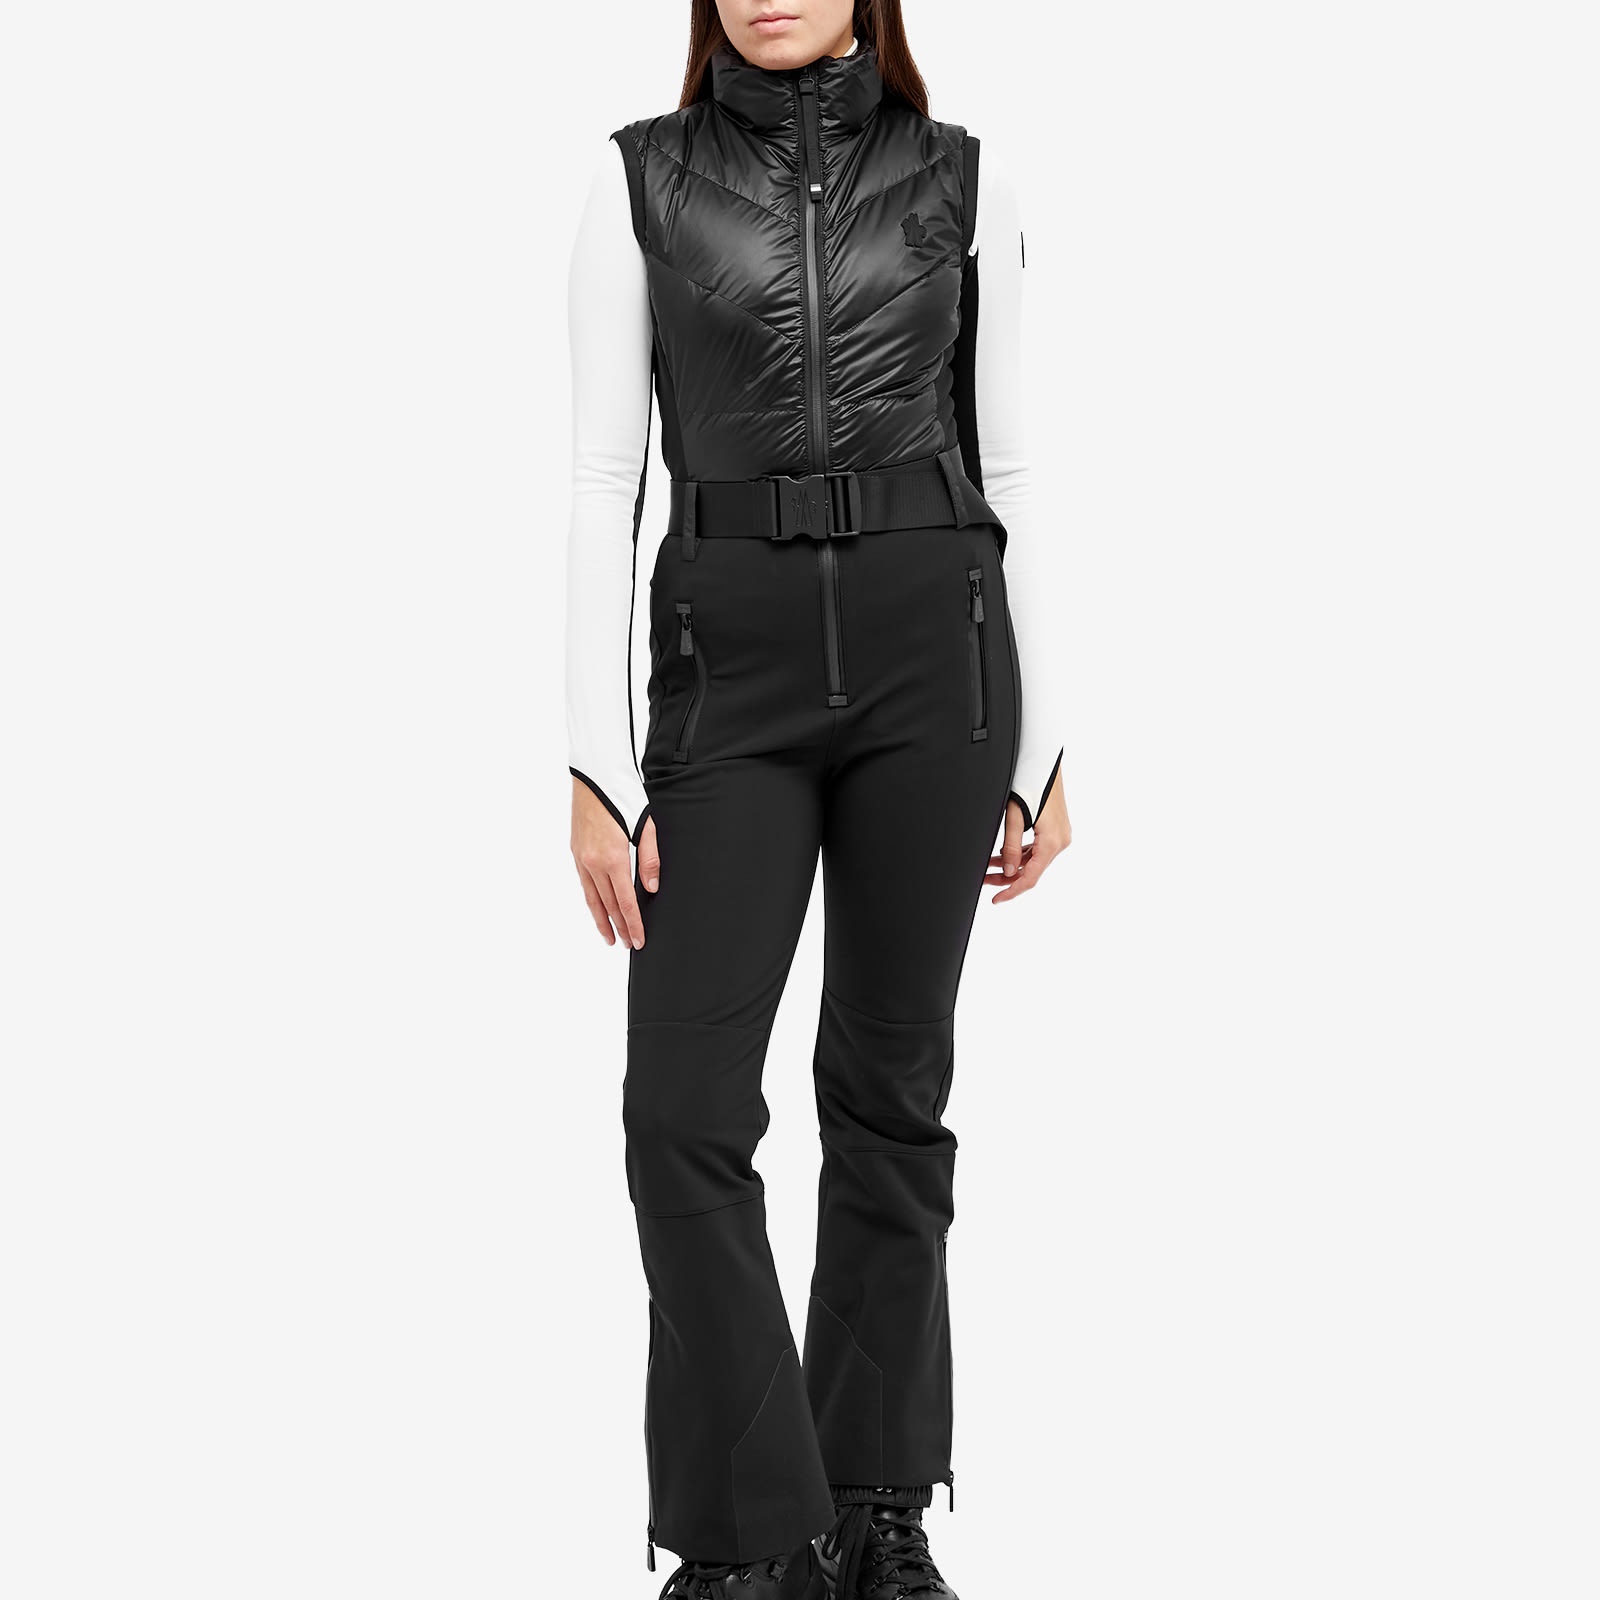 Moncler Grenoble All In One Ski Suit - 2